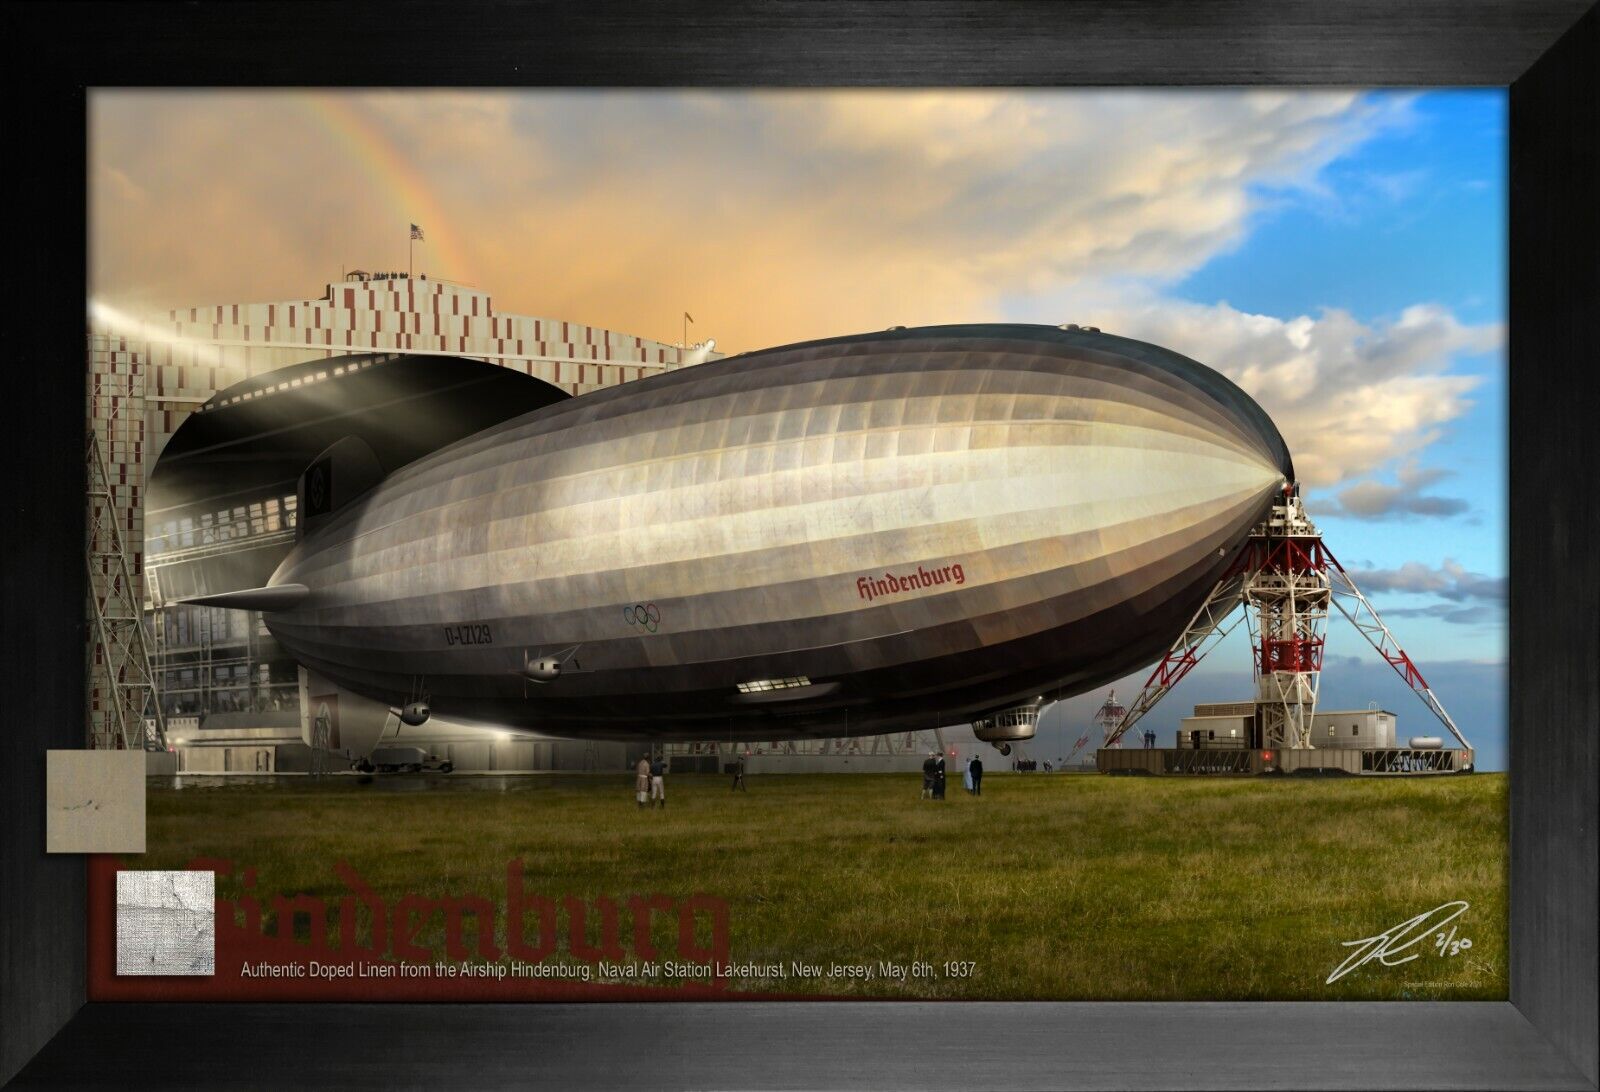 Airship Hindenburg LZ 129 Doped Linen Skin Relic Display by Ron Cole